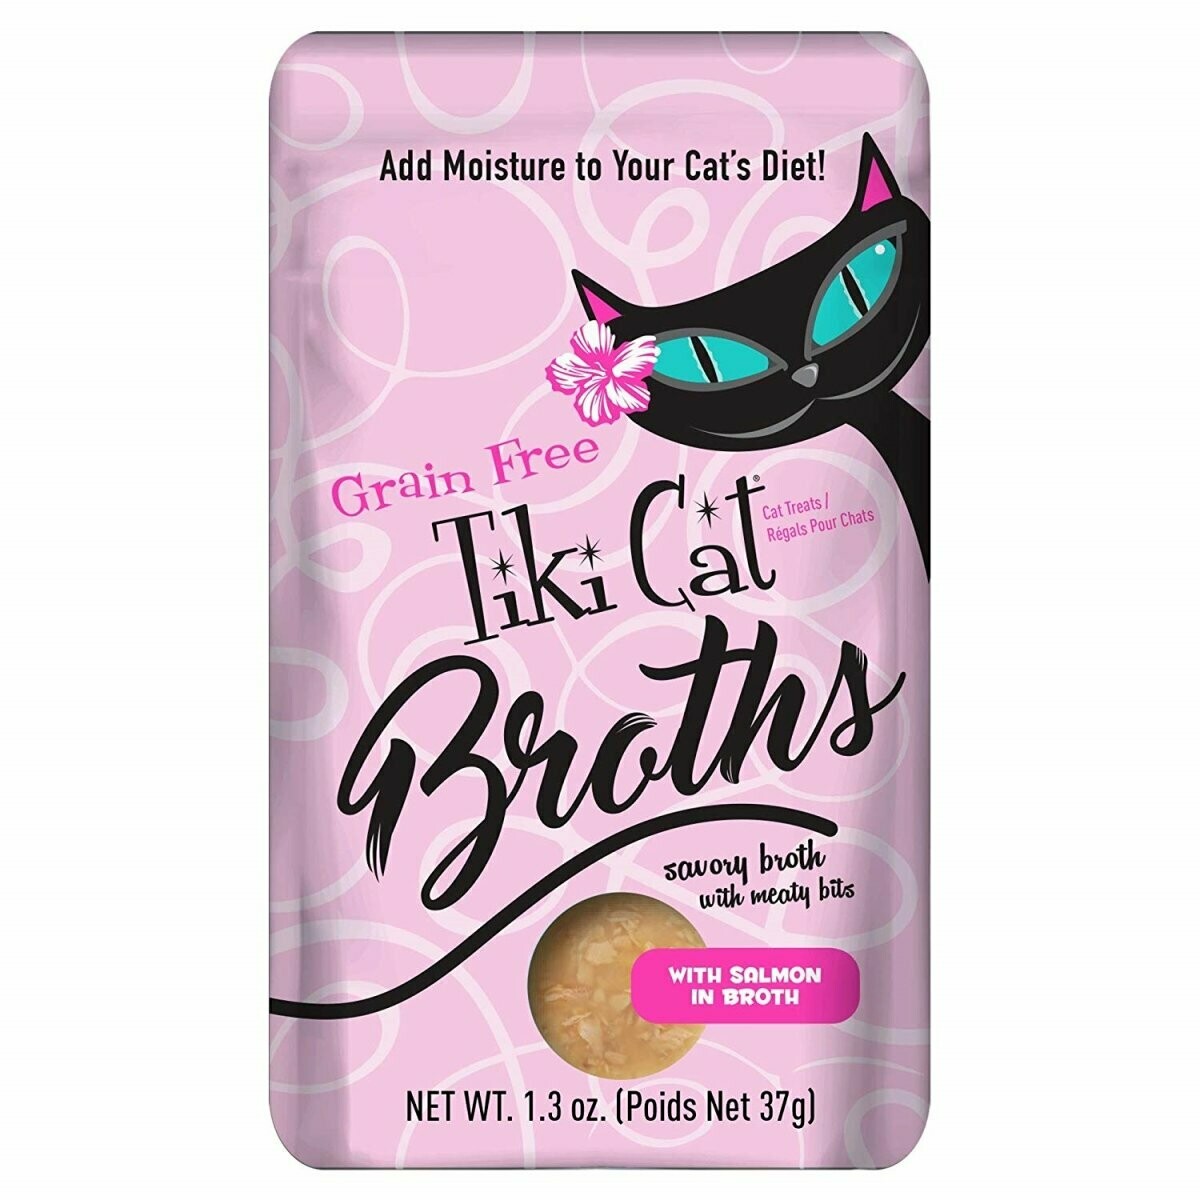 Tiki Cat Broths Salmon in Broth Wet Cat Food, 1.3-oz pouch